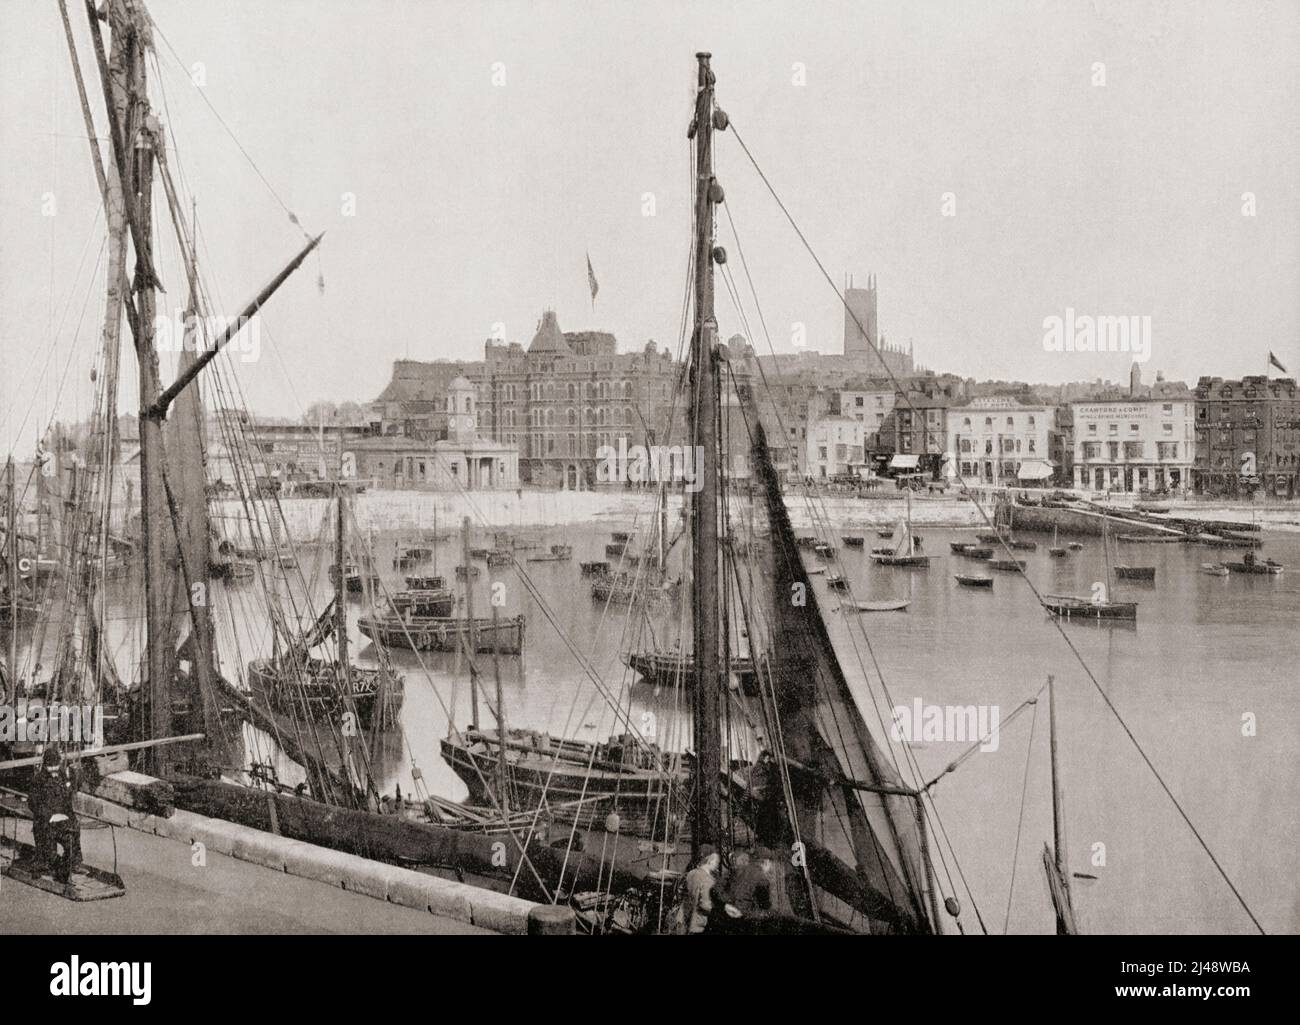 The harbour and jetty, Margate, Kent, England, seen here in the 19th century.  From Around The Coast,  An Album of Pictures from Photographs of the Chief Seaside Places of Interest in Great Britain and Ireland published London, 1895, by George Newnes Limited. Stock Photo